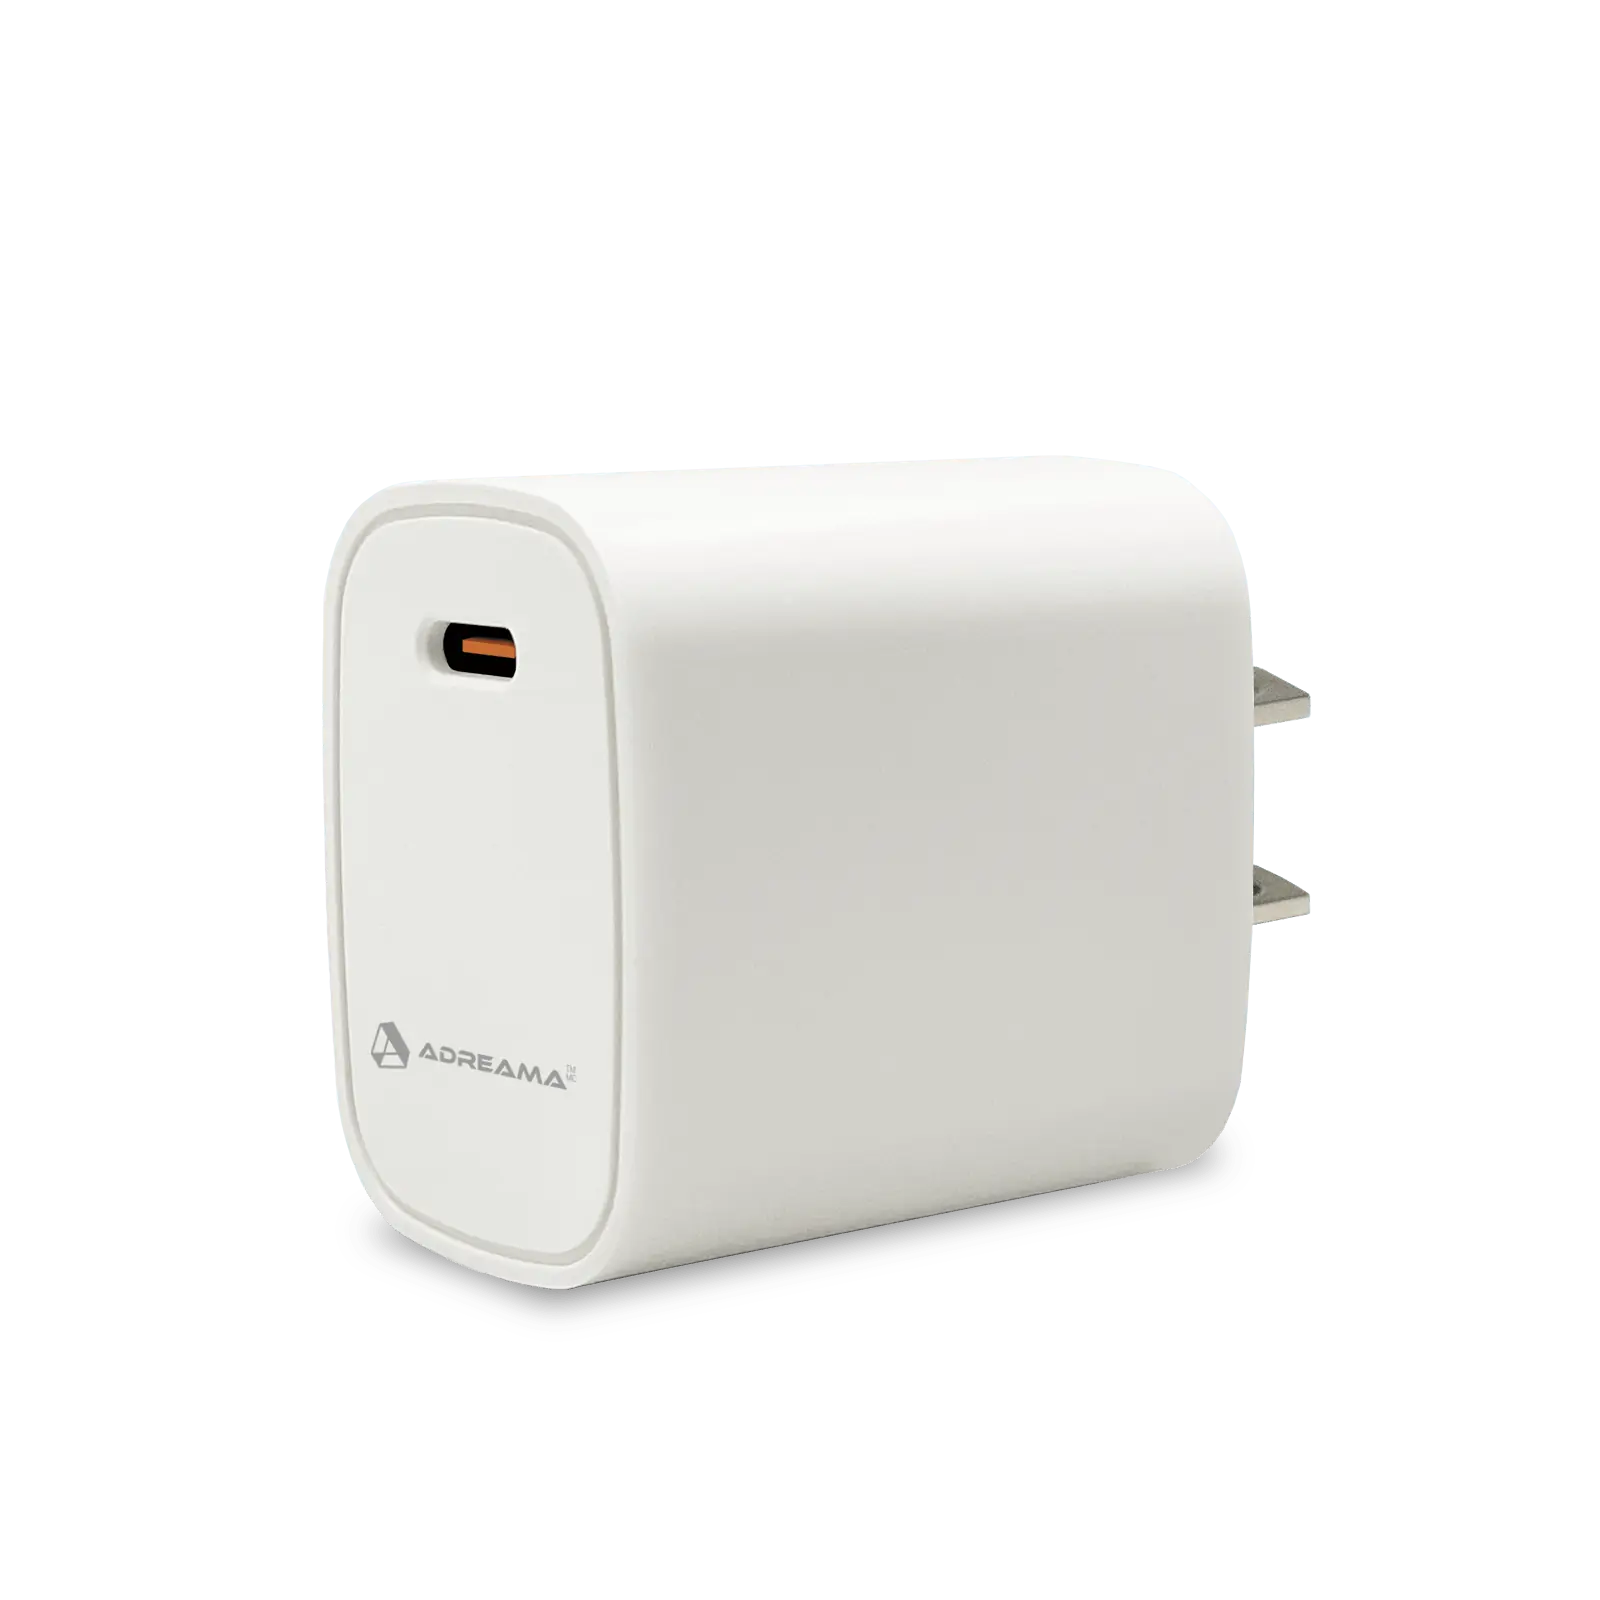 The Power of One: The Adreama PD 20W Wall Charger